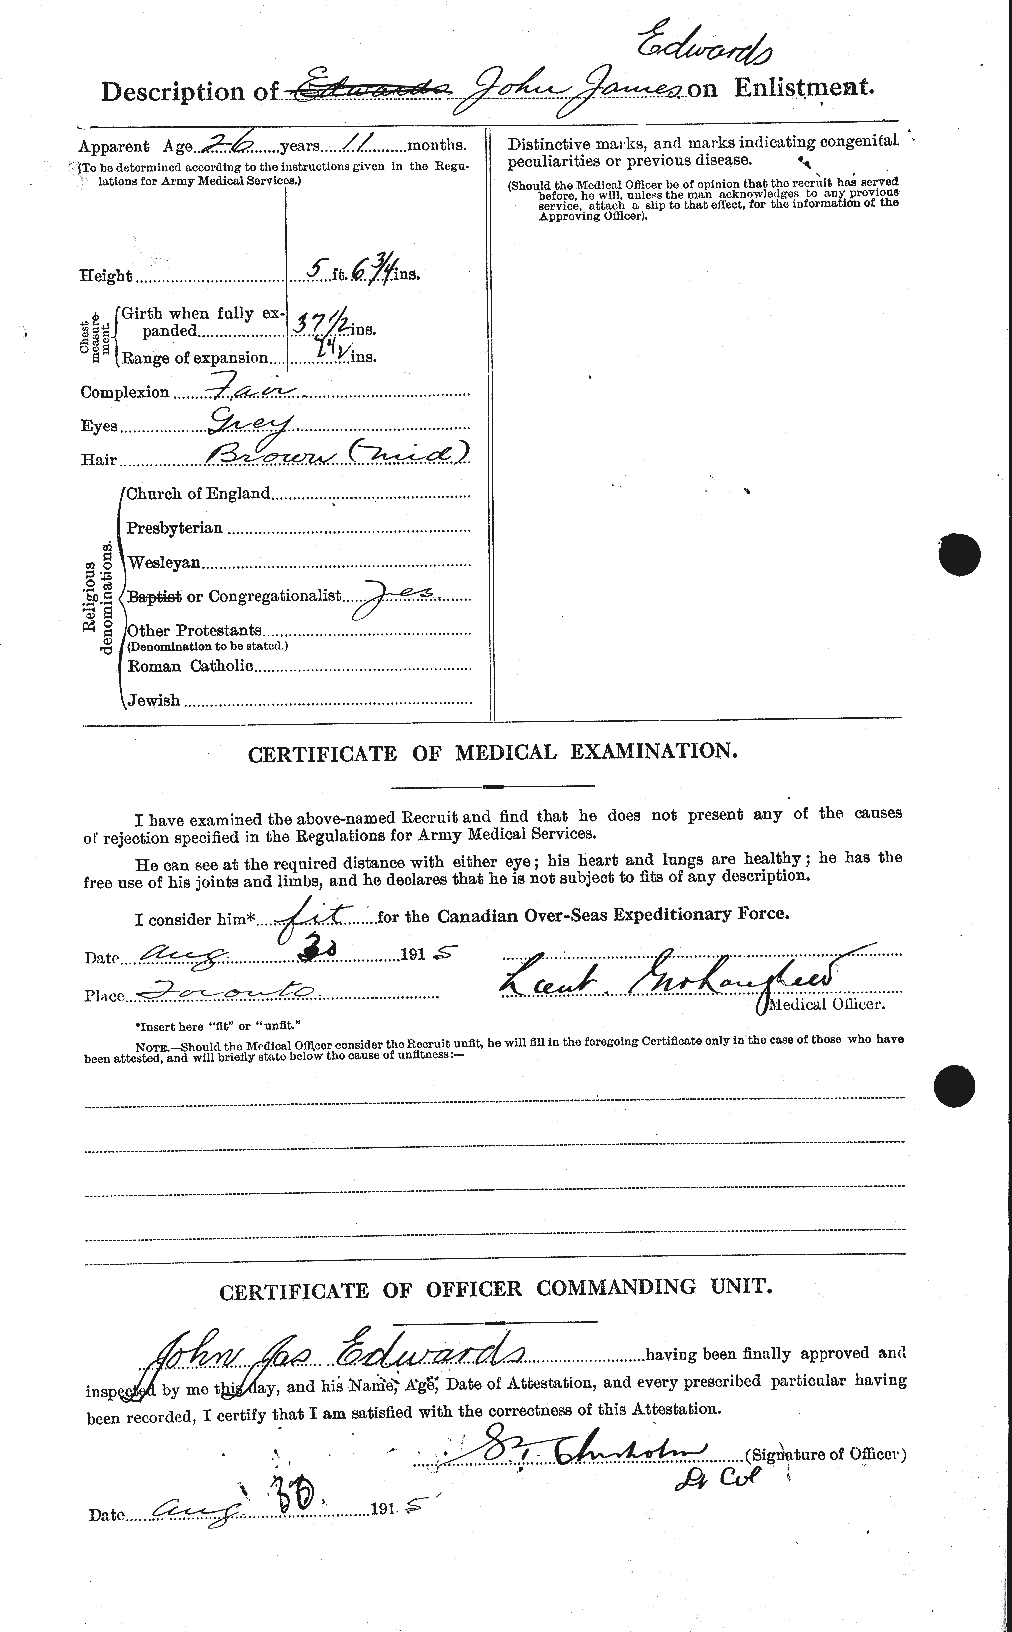 Personnel Records of the First World War - CEF 310138b